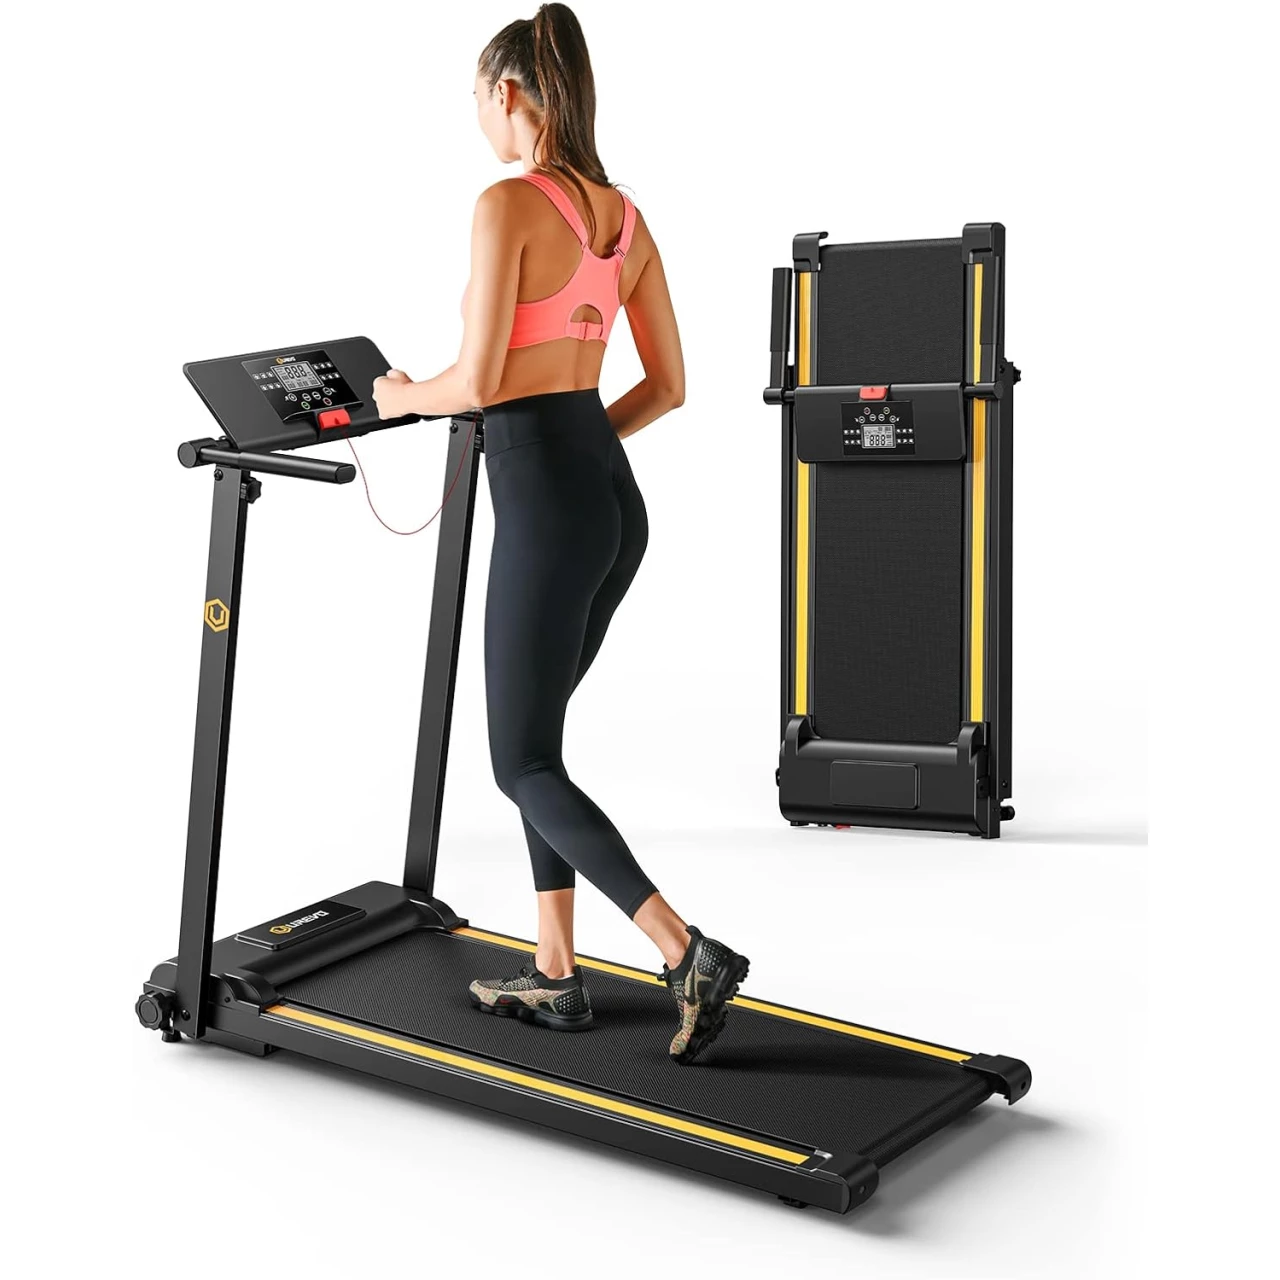 UREVO Folding Treadmill, 2.25HP Foldable Treadmill with 12 HIIT Modes, Compact Mini Treadmill for Home Office, Space Saving Small Treadmill with Large Running Area, LCD Display, Easy to Fold